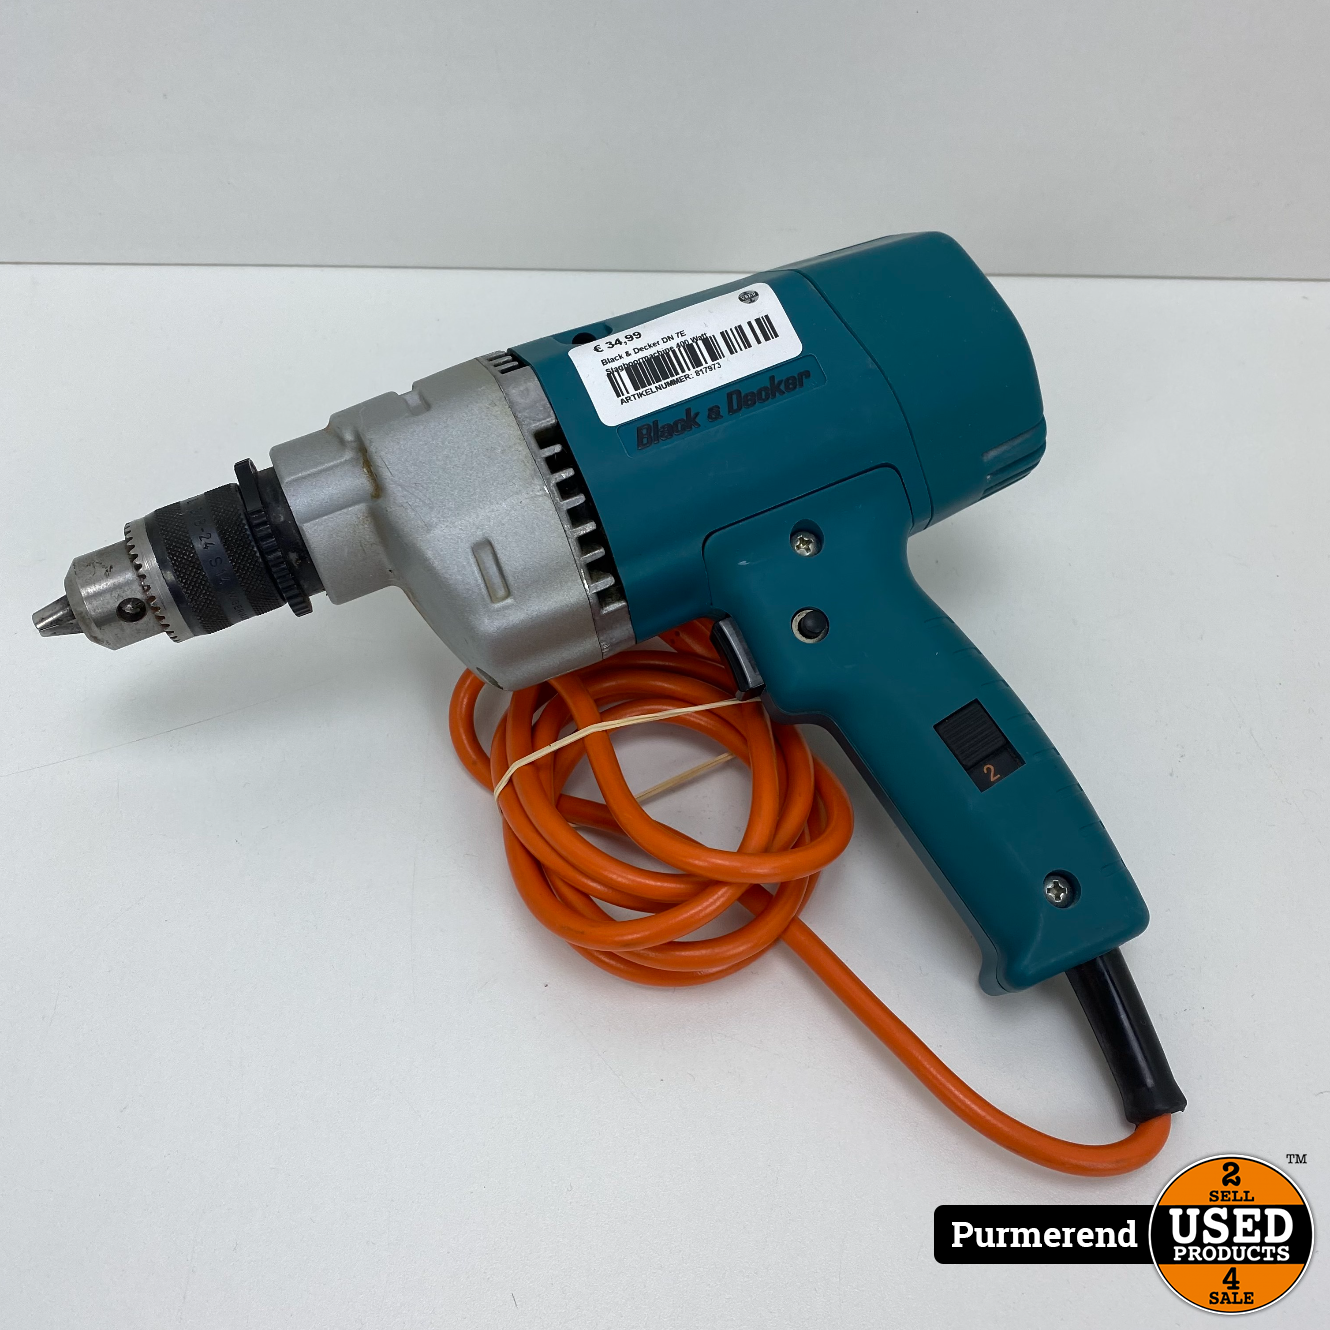 Black &amp; Decker DN 7E 400 Products Purmerend